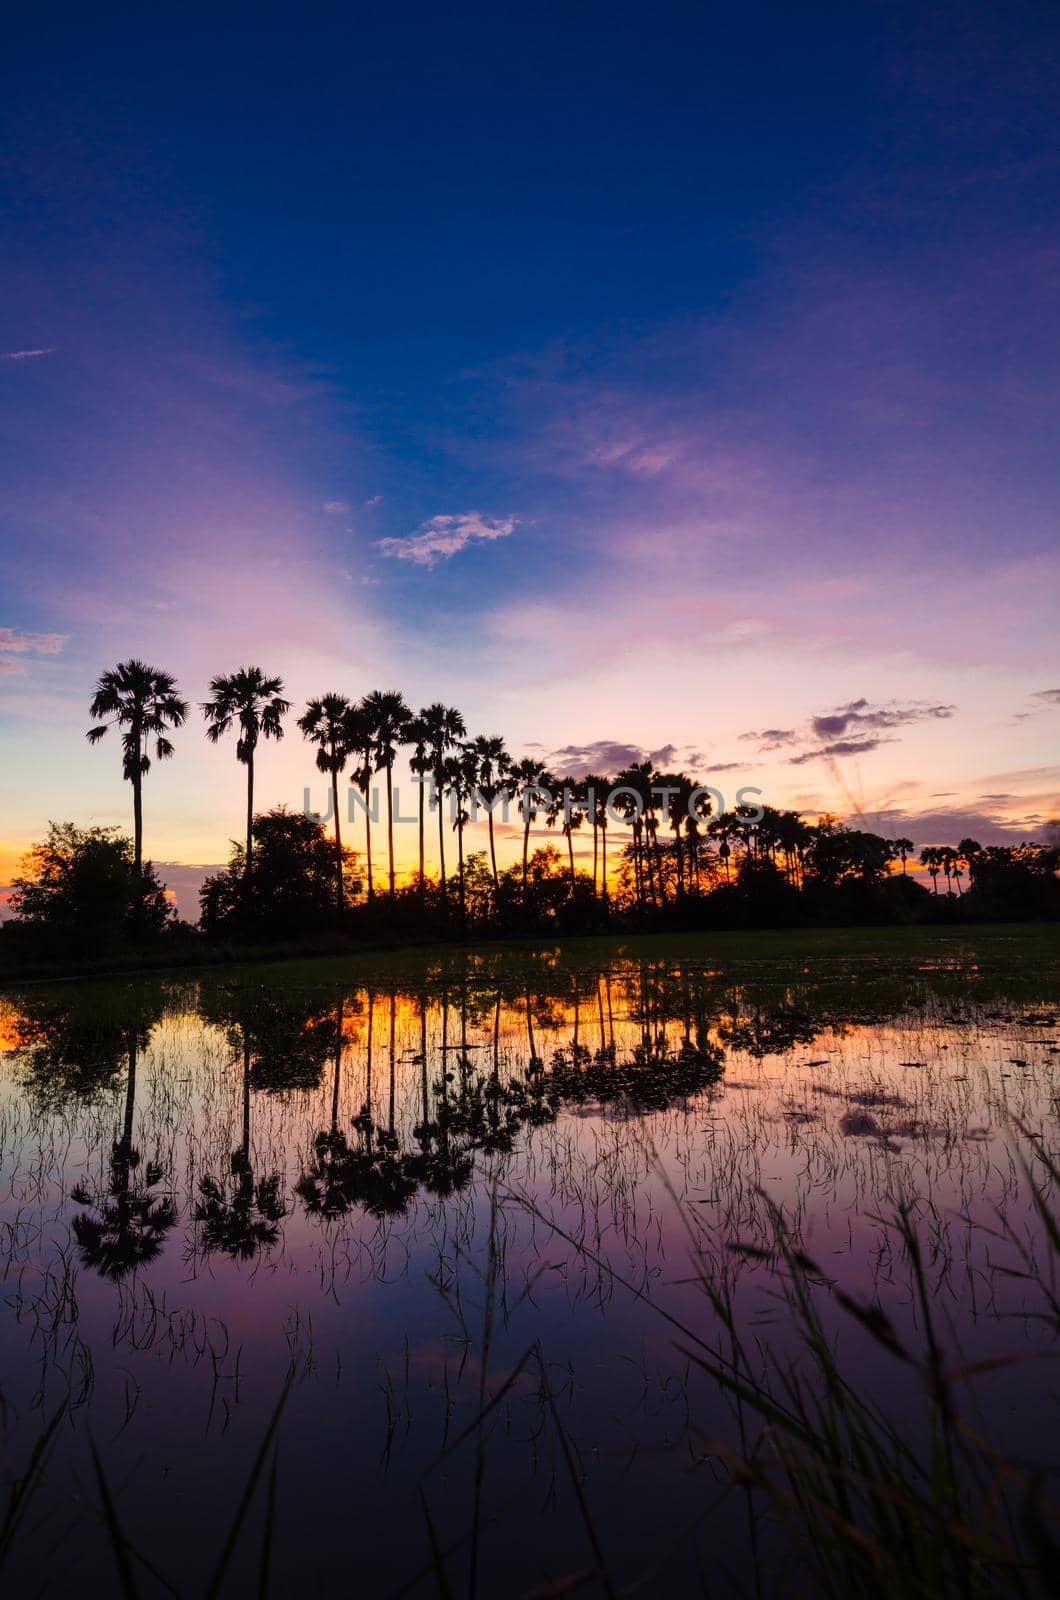 The silhouette of the toddy palms or sugar palm in the field with the colorful sky. by Gamjai